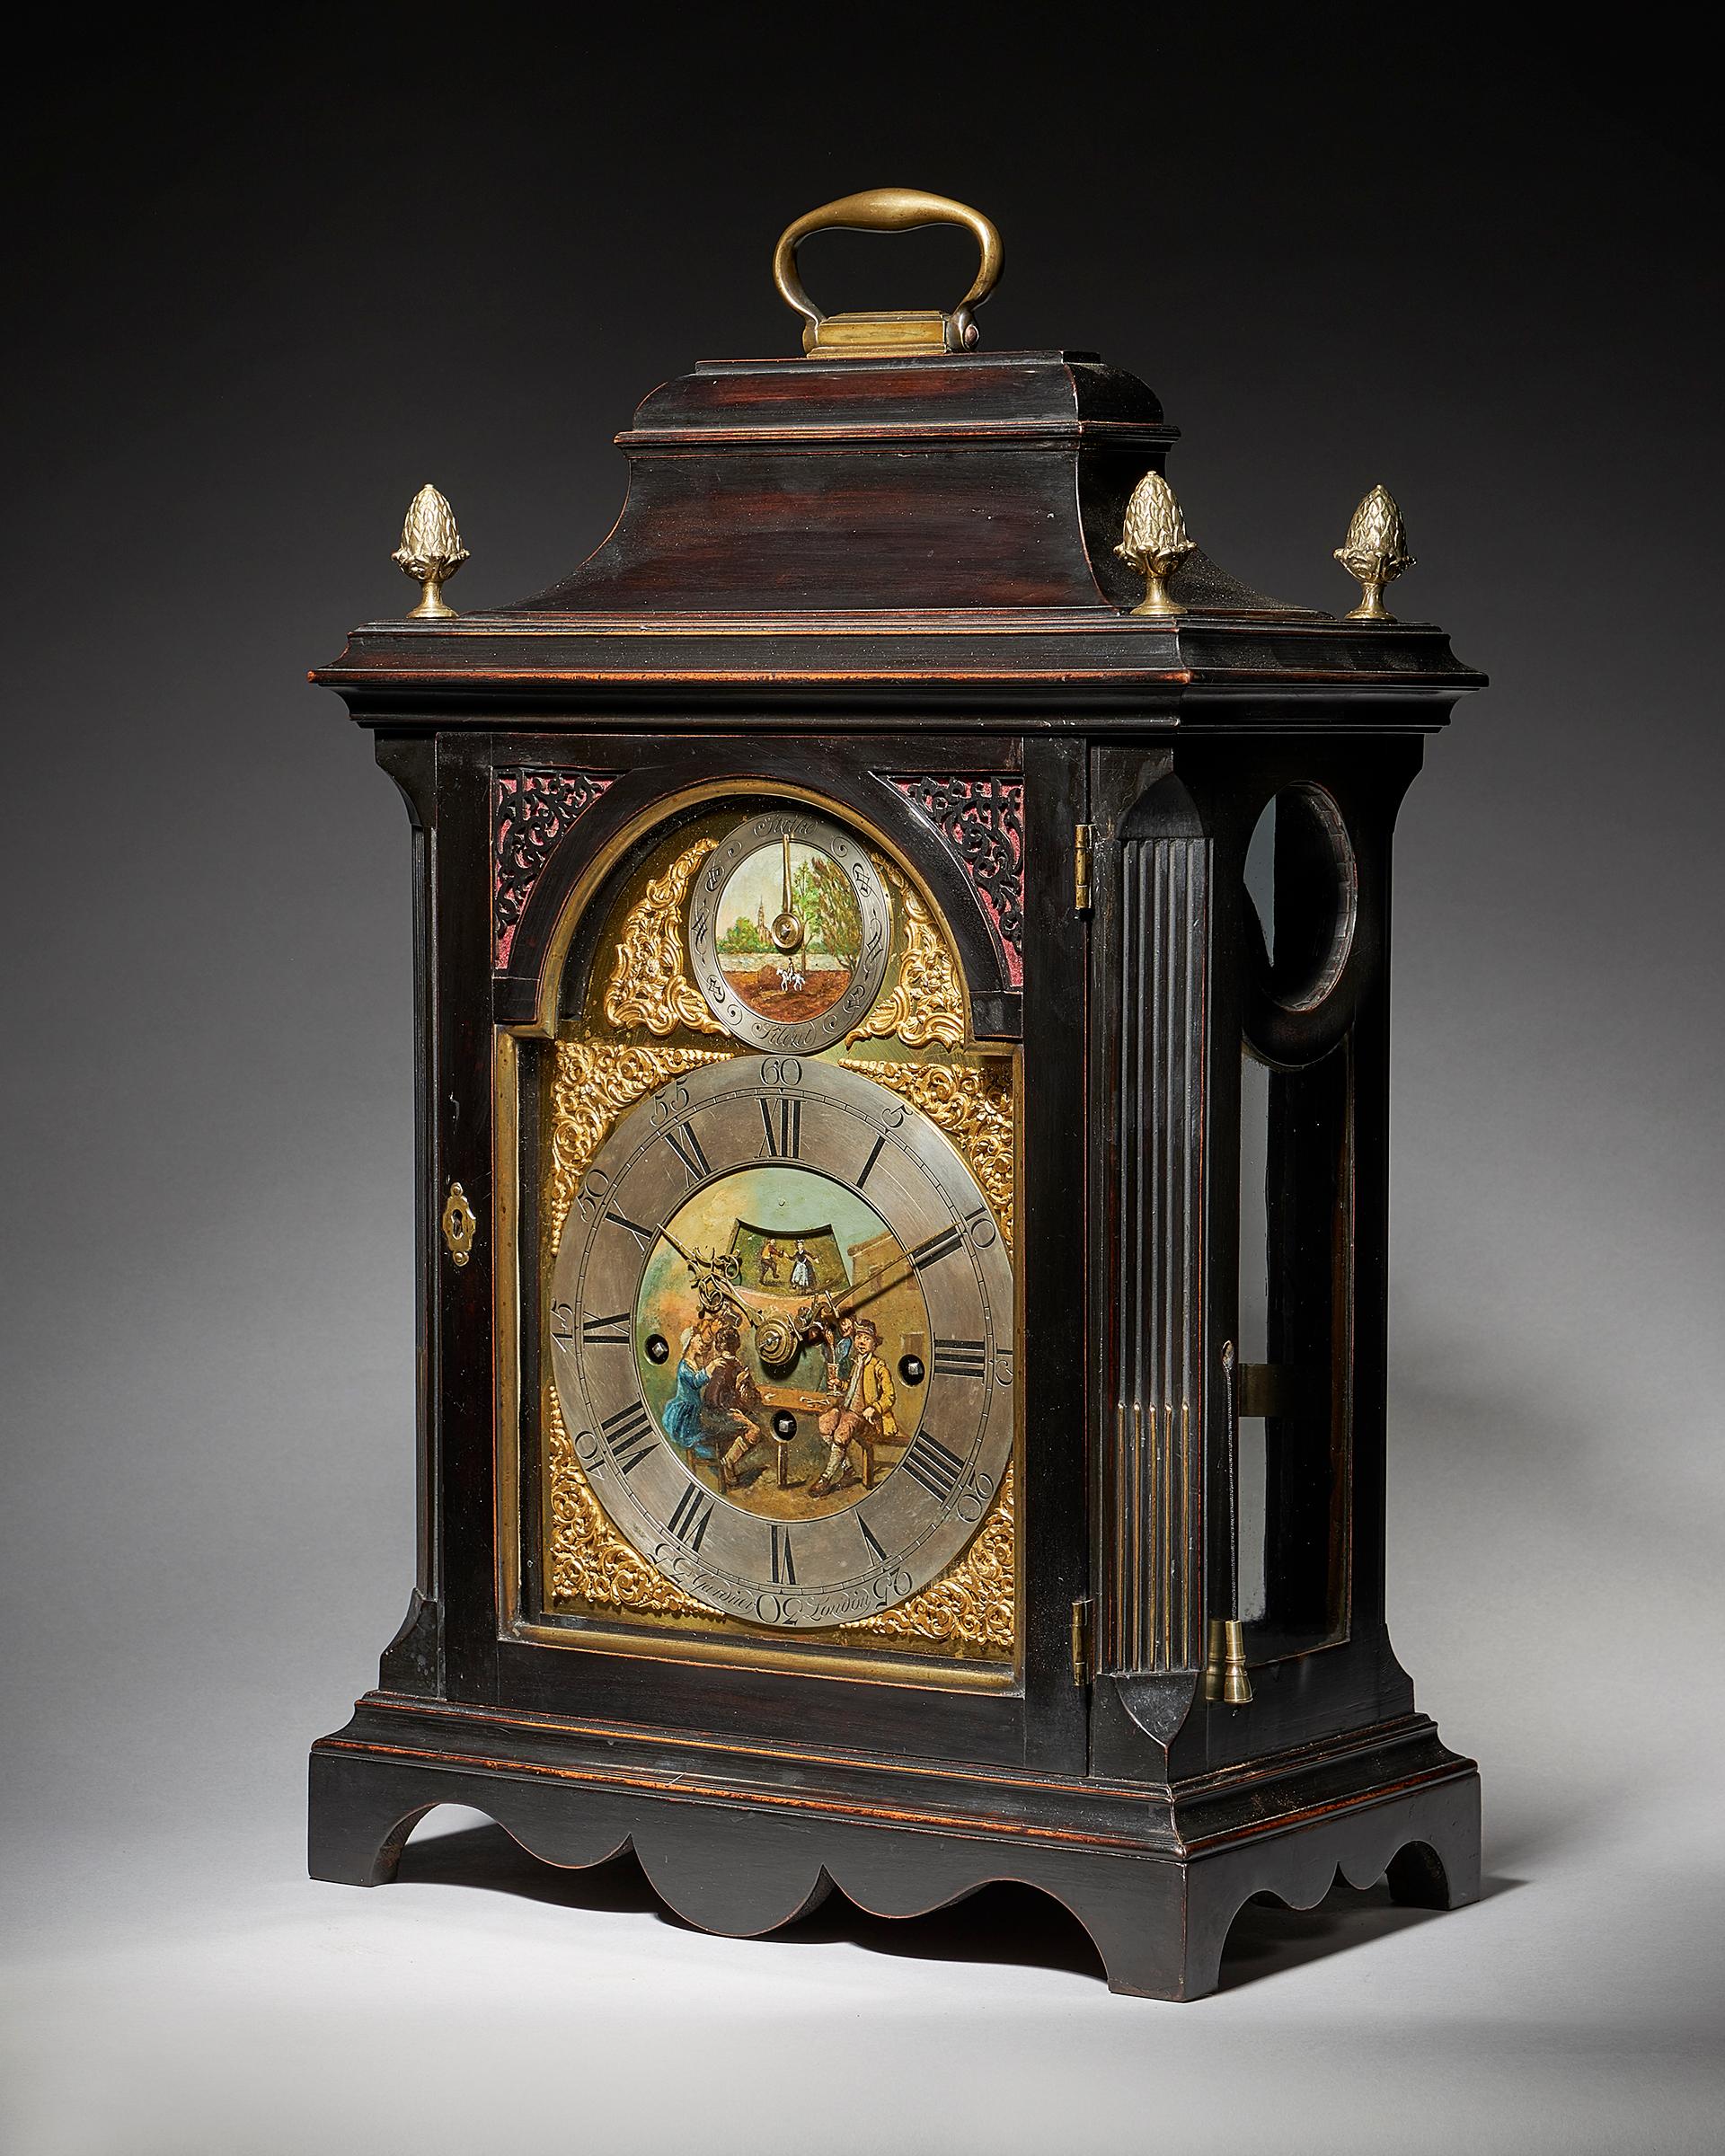 An extremely rare George III 18th century ebonized quarter-striking bracket clock by Thomas Gardner, London, circa 1760.

A fantastically rare and intricate bracket clock paying homage to merriment. The dial is elaborately decorated with drinking